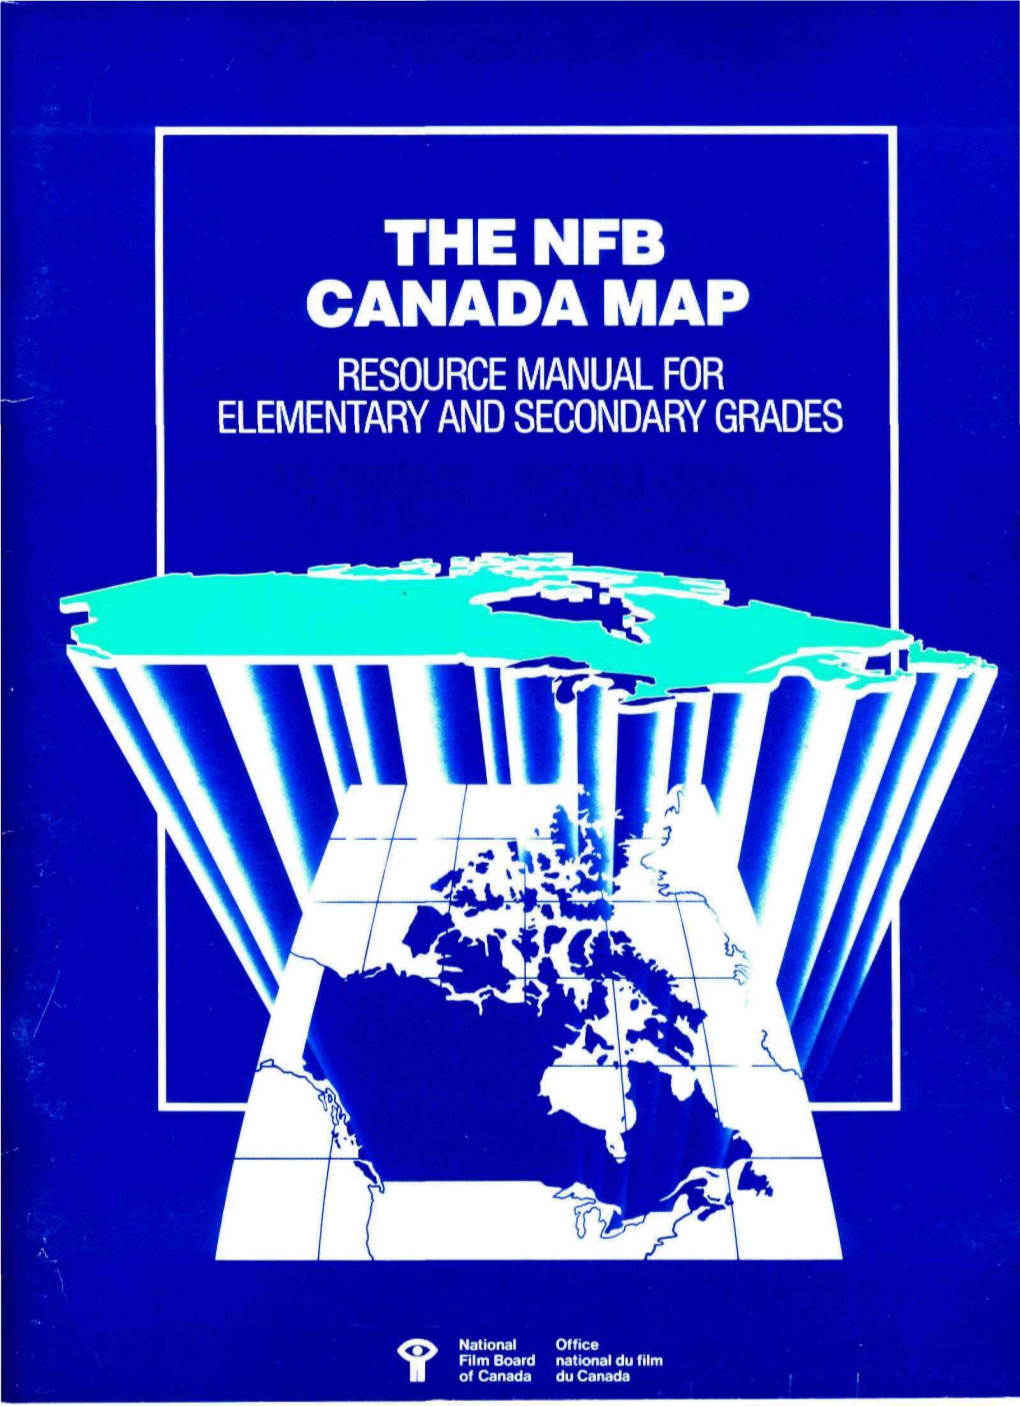 The Nfb Canada Map Resource Manual for Elementary and Secondary Grades